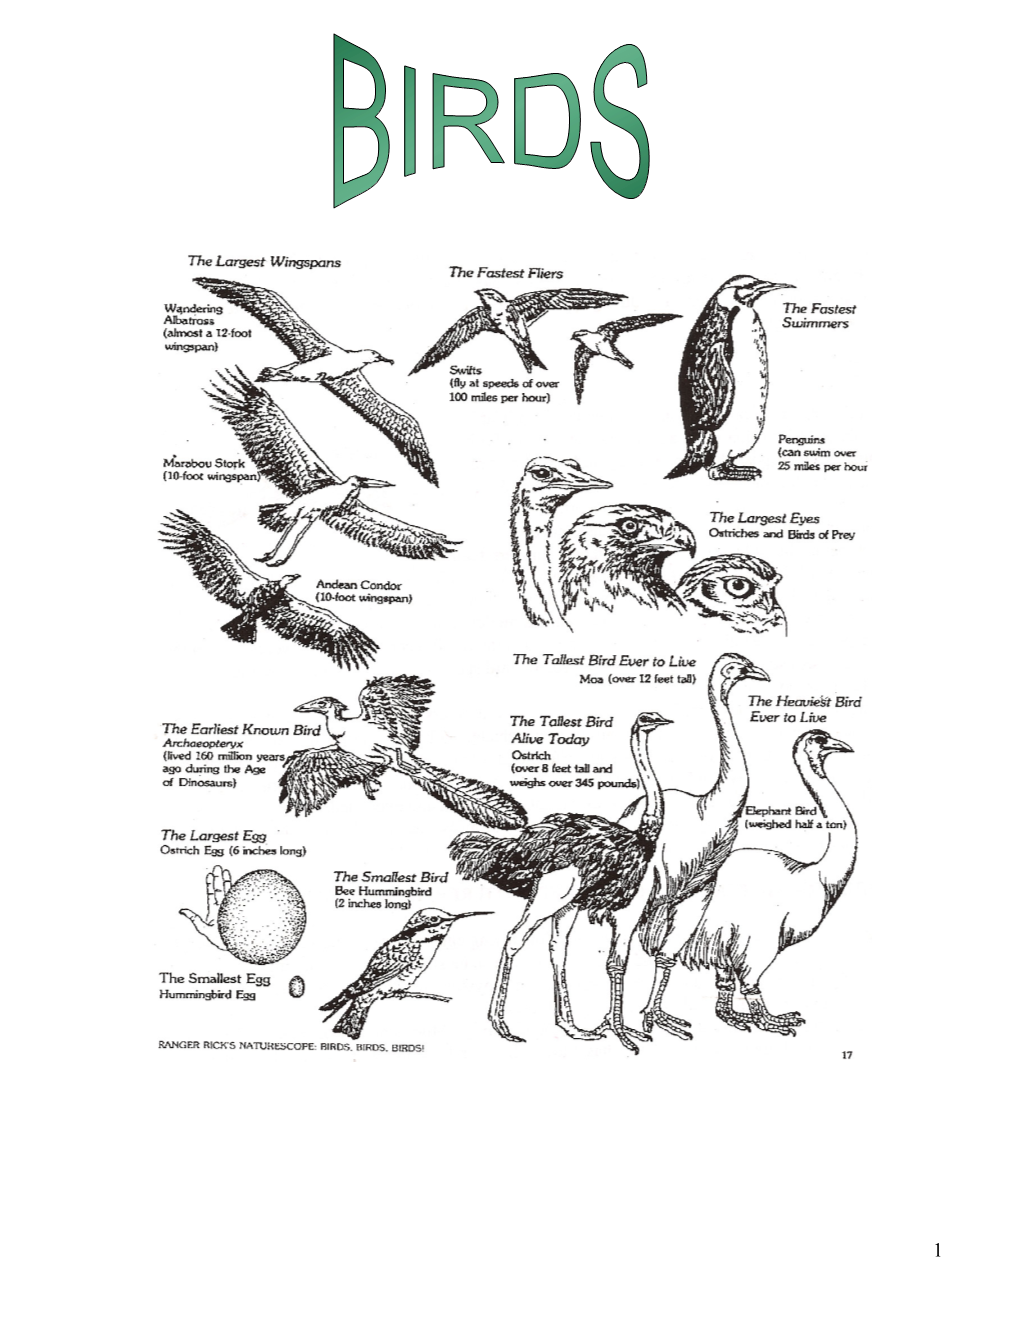 Bird Feather Types, Anatomy, and Molting